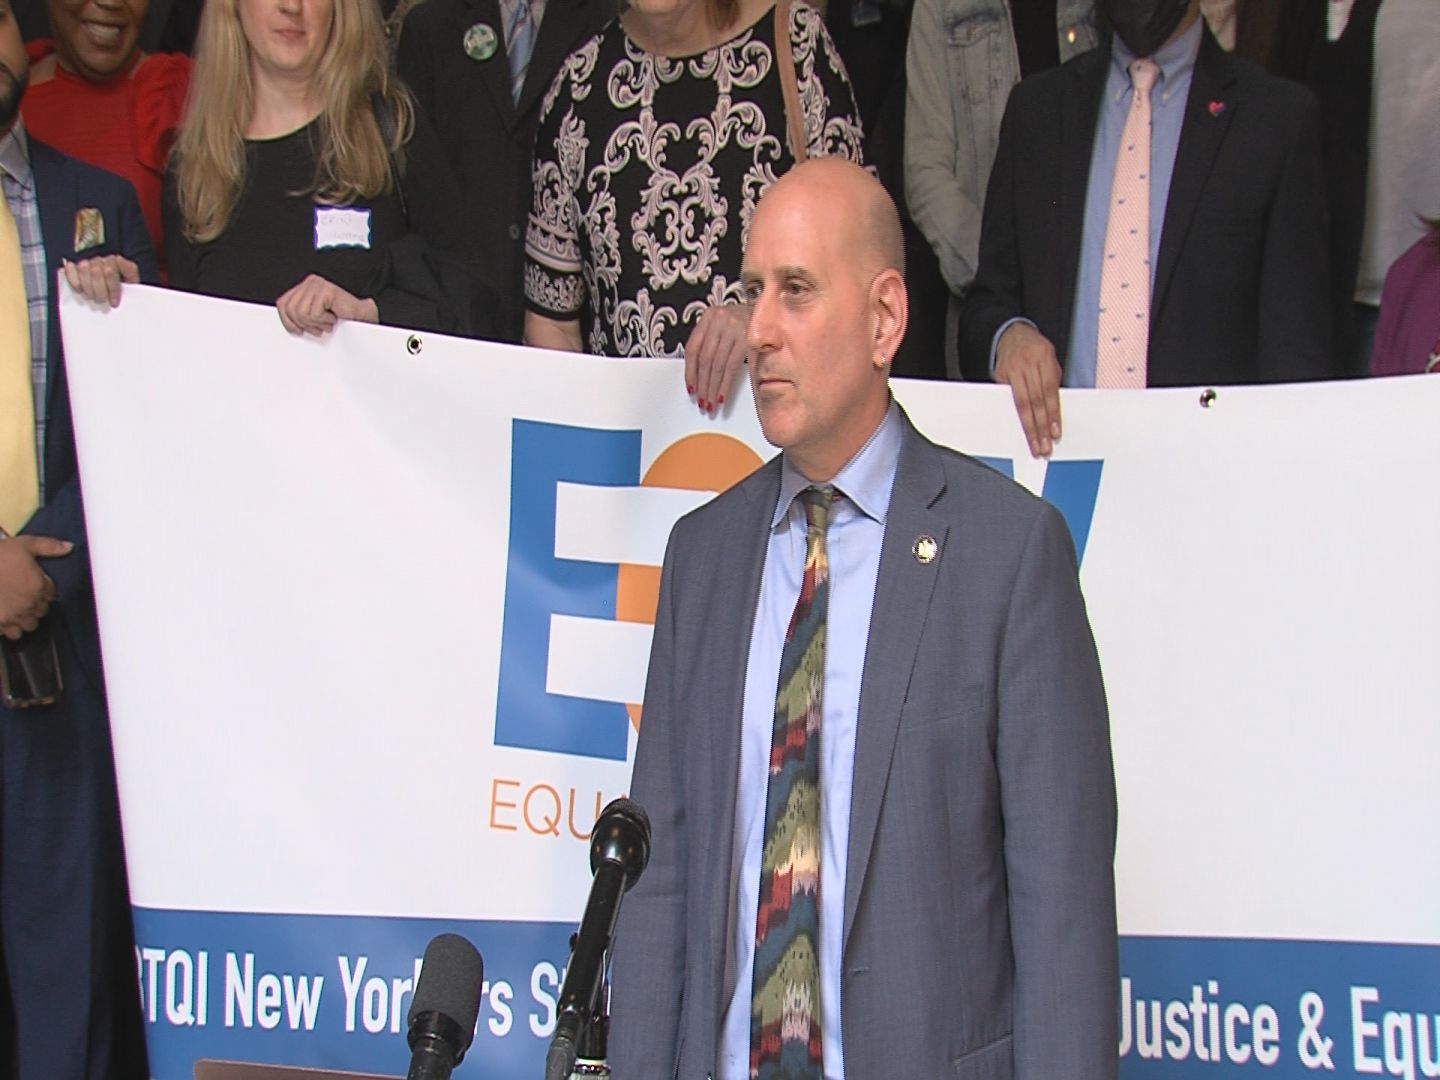 Epstein Speaks Out at Equality NY Press Conference